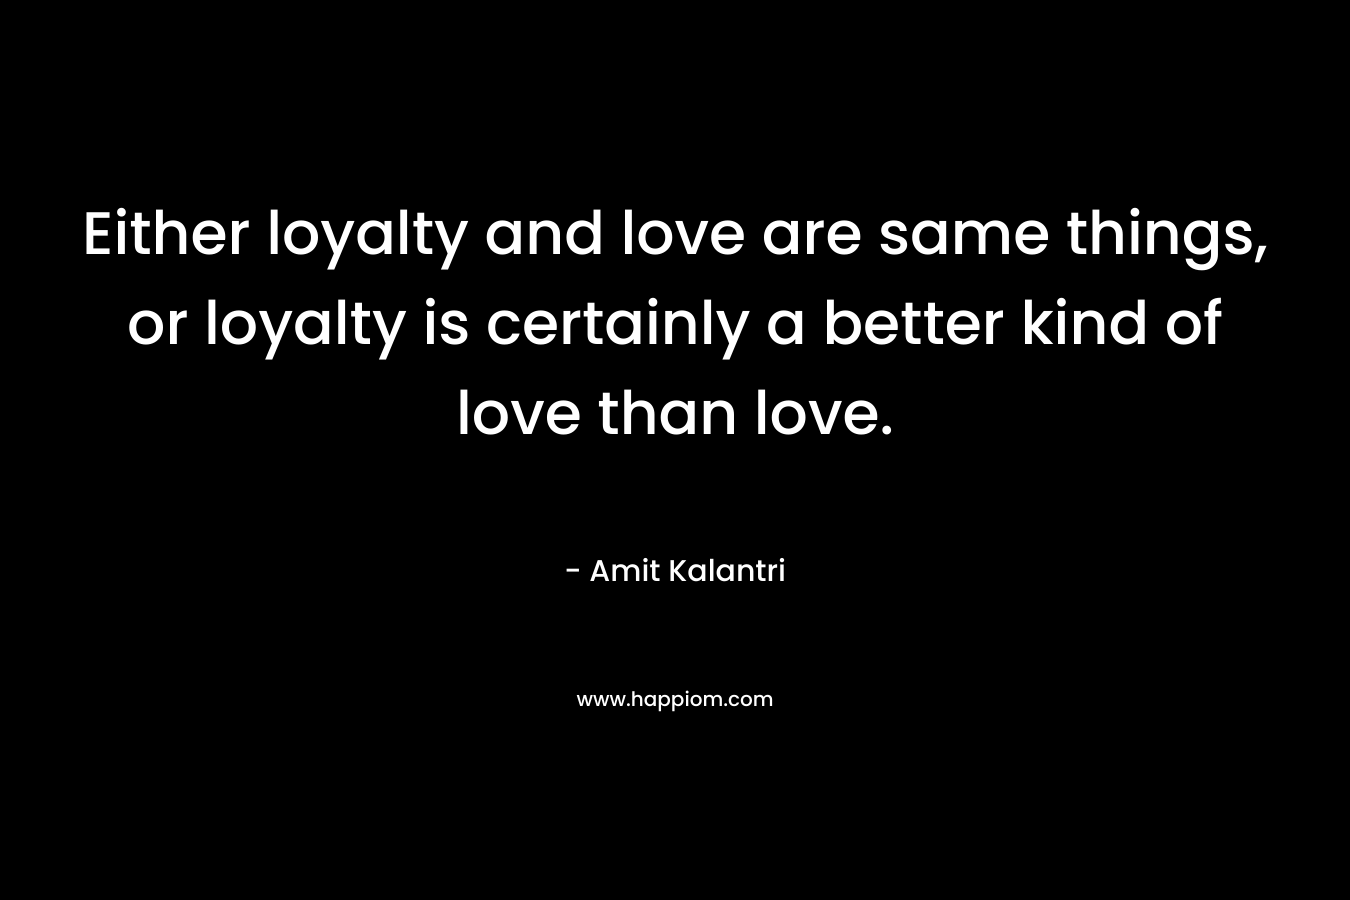 Either loyalty and love are same things, or loyalty is certainly a better kind of love than love.